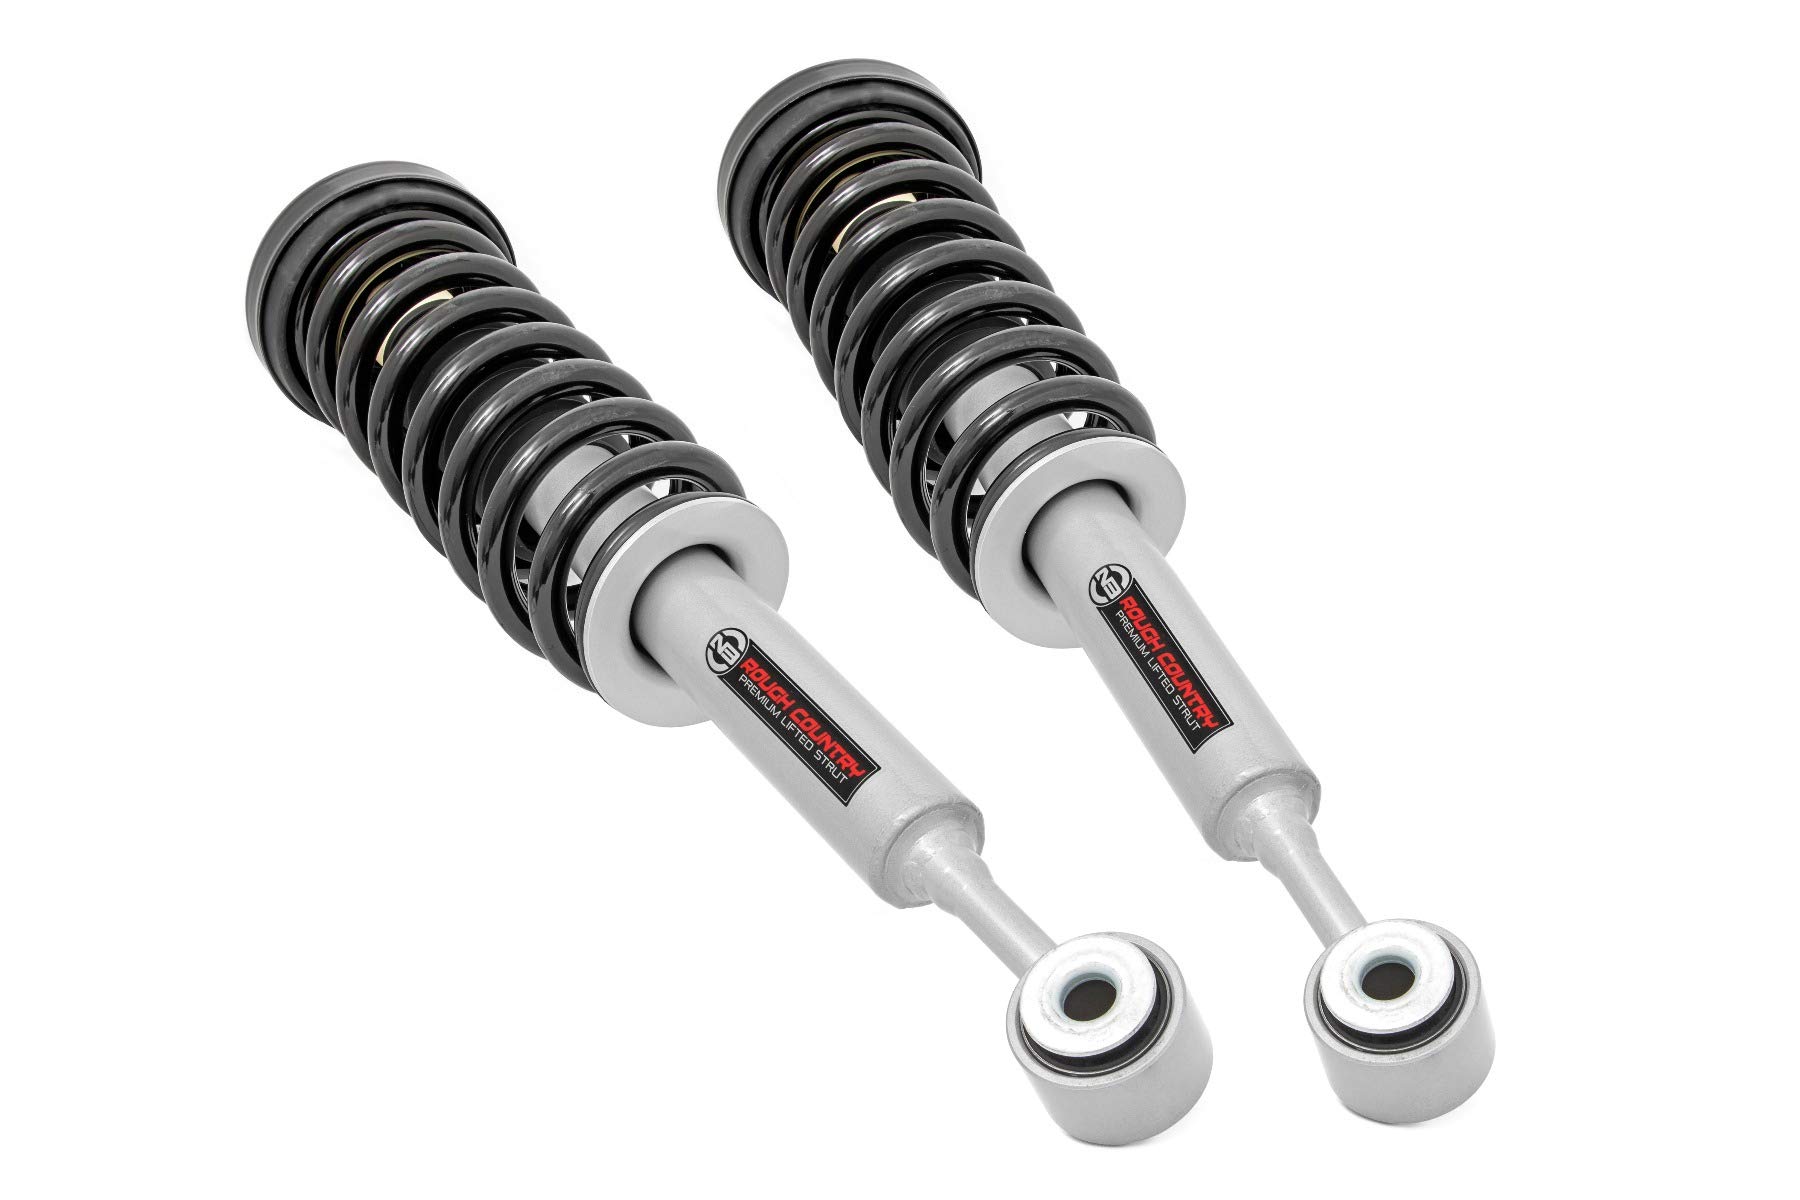 Rough Country 6" Loaded N3 Lifted Struts for 2004-2008 Ford F-150 4WD - 501003